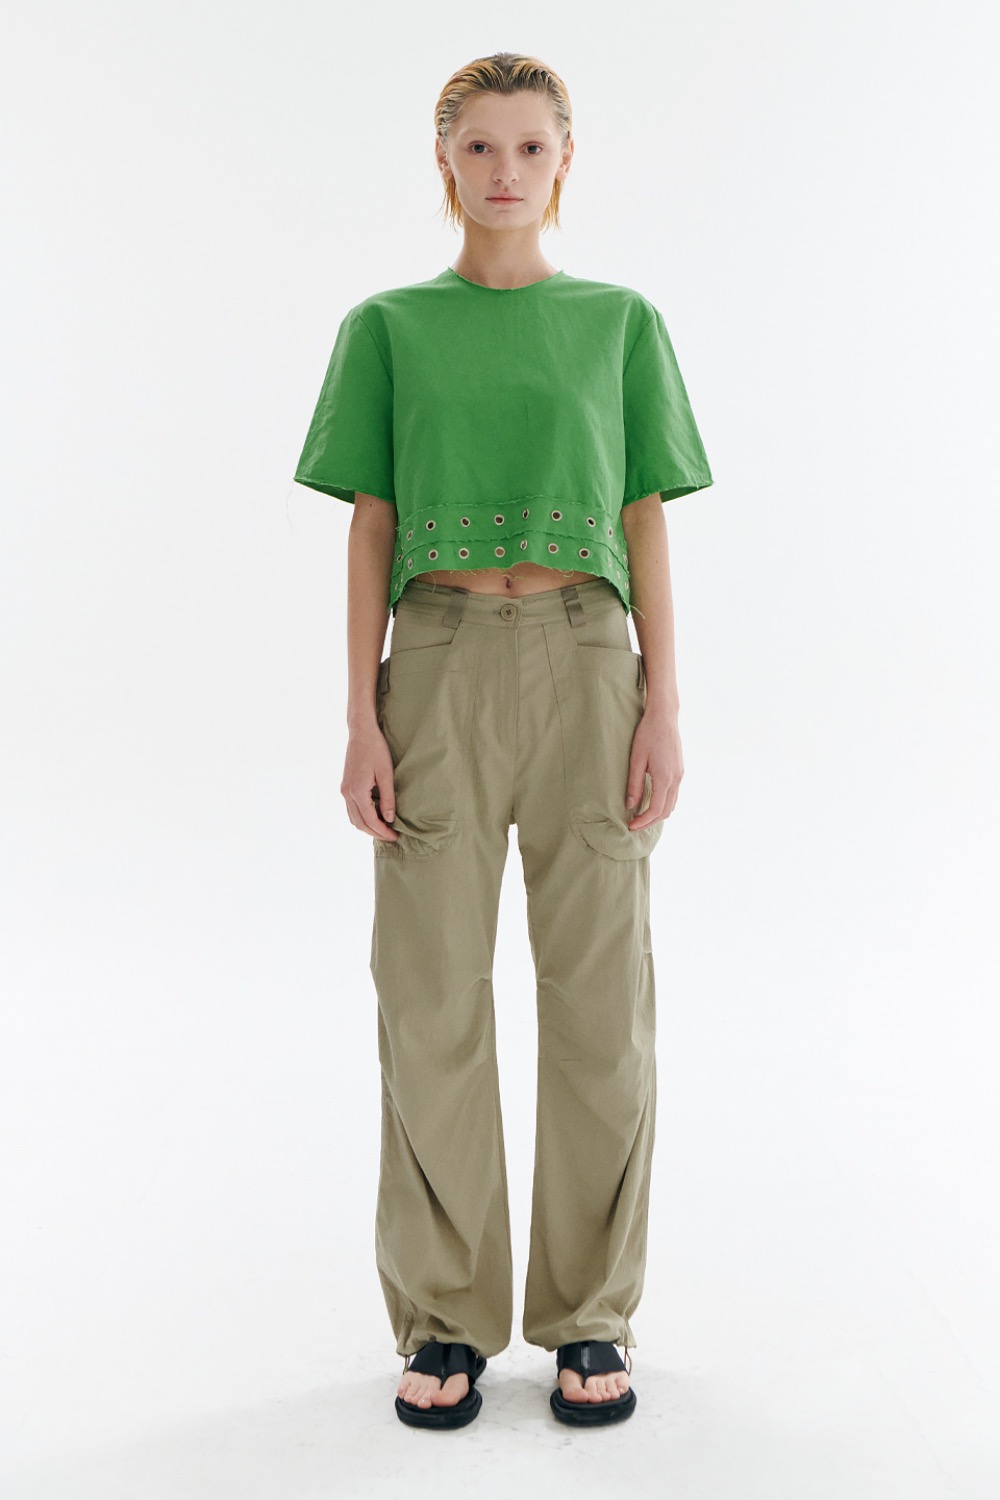 Two Line punching Blouse [Green]